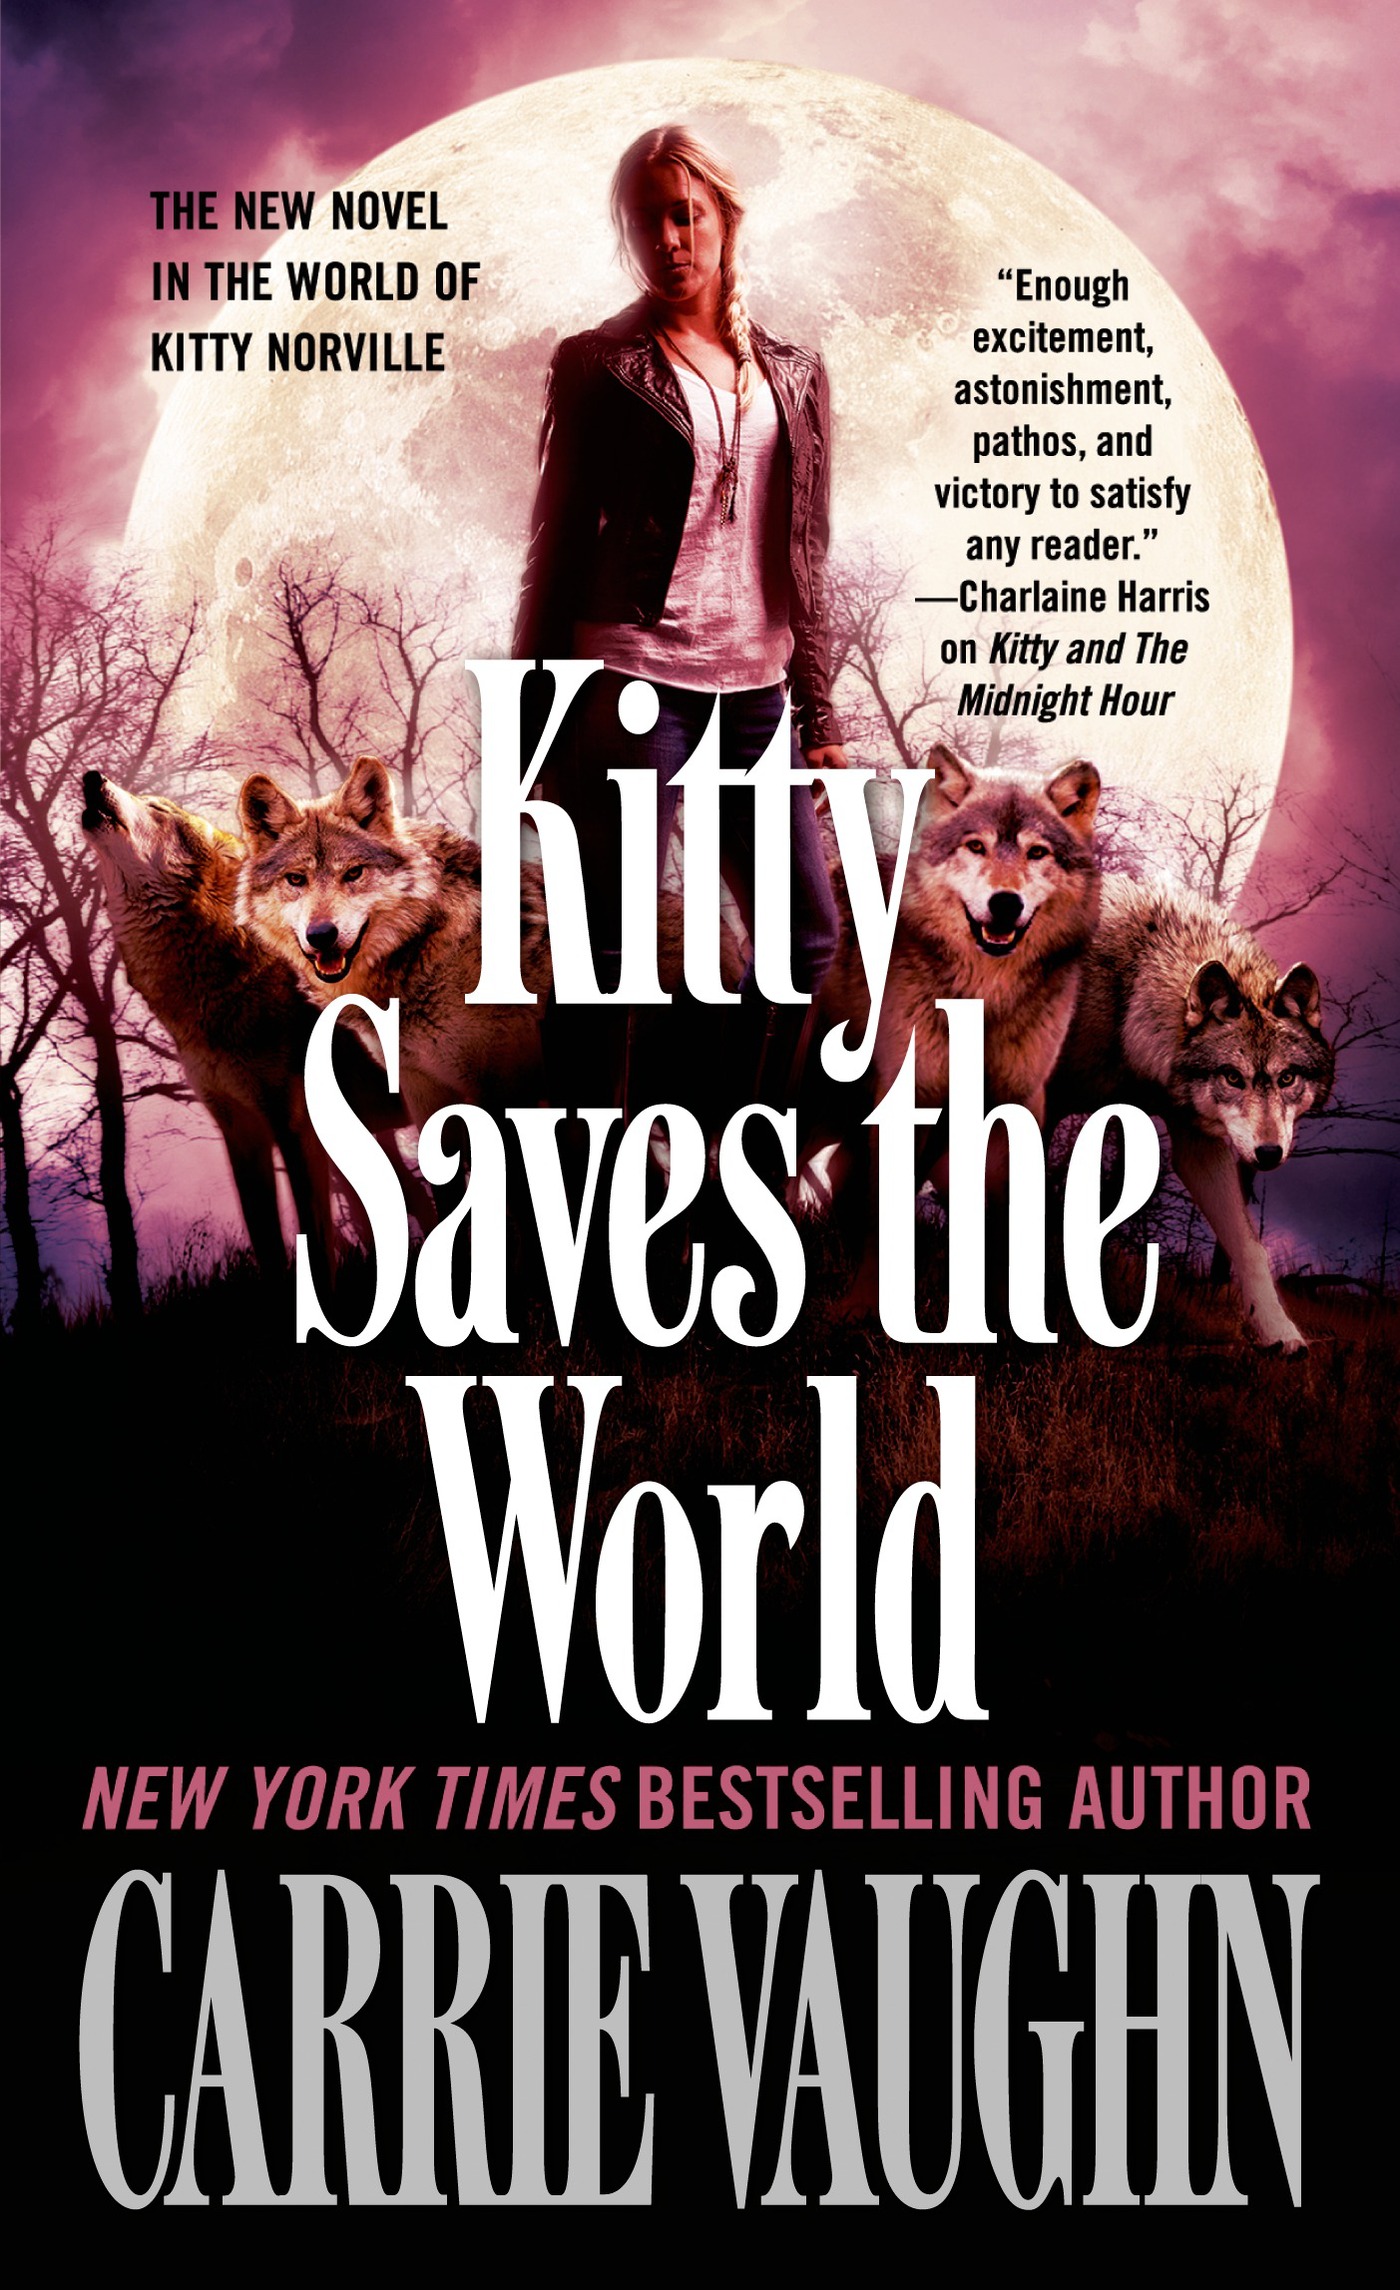 Kitty Saves the World : A Kitty Norville Novel by Carrie Vaughn